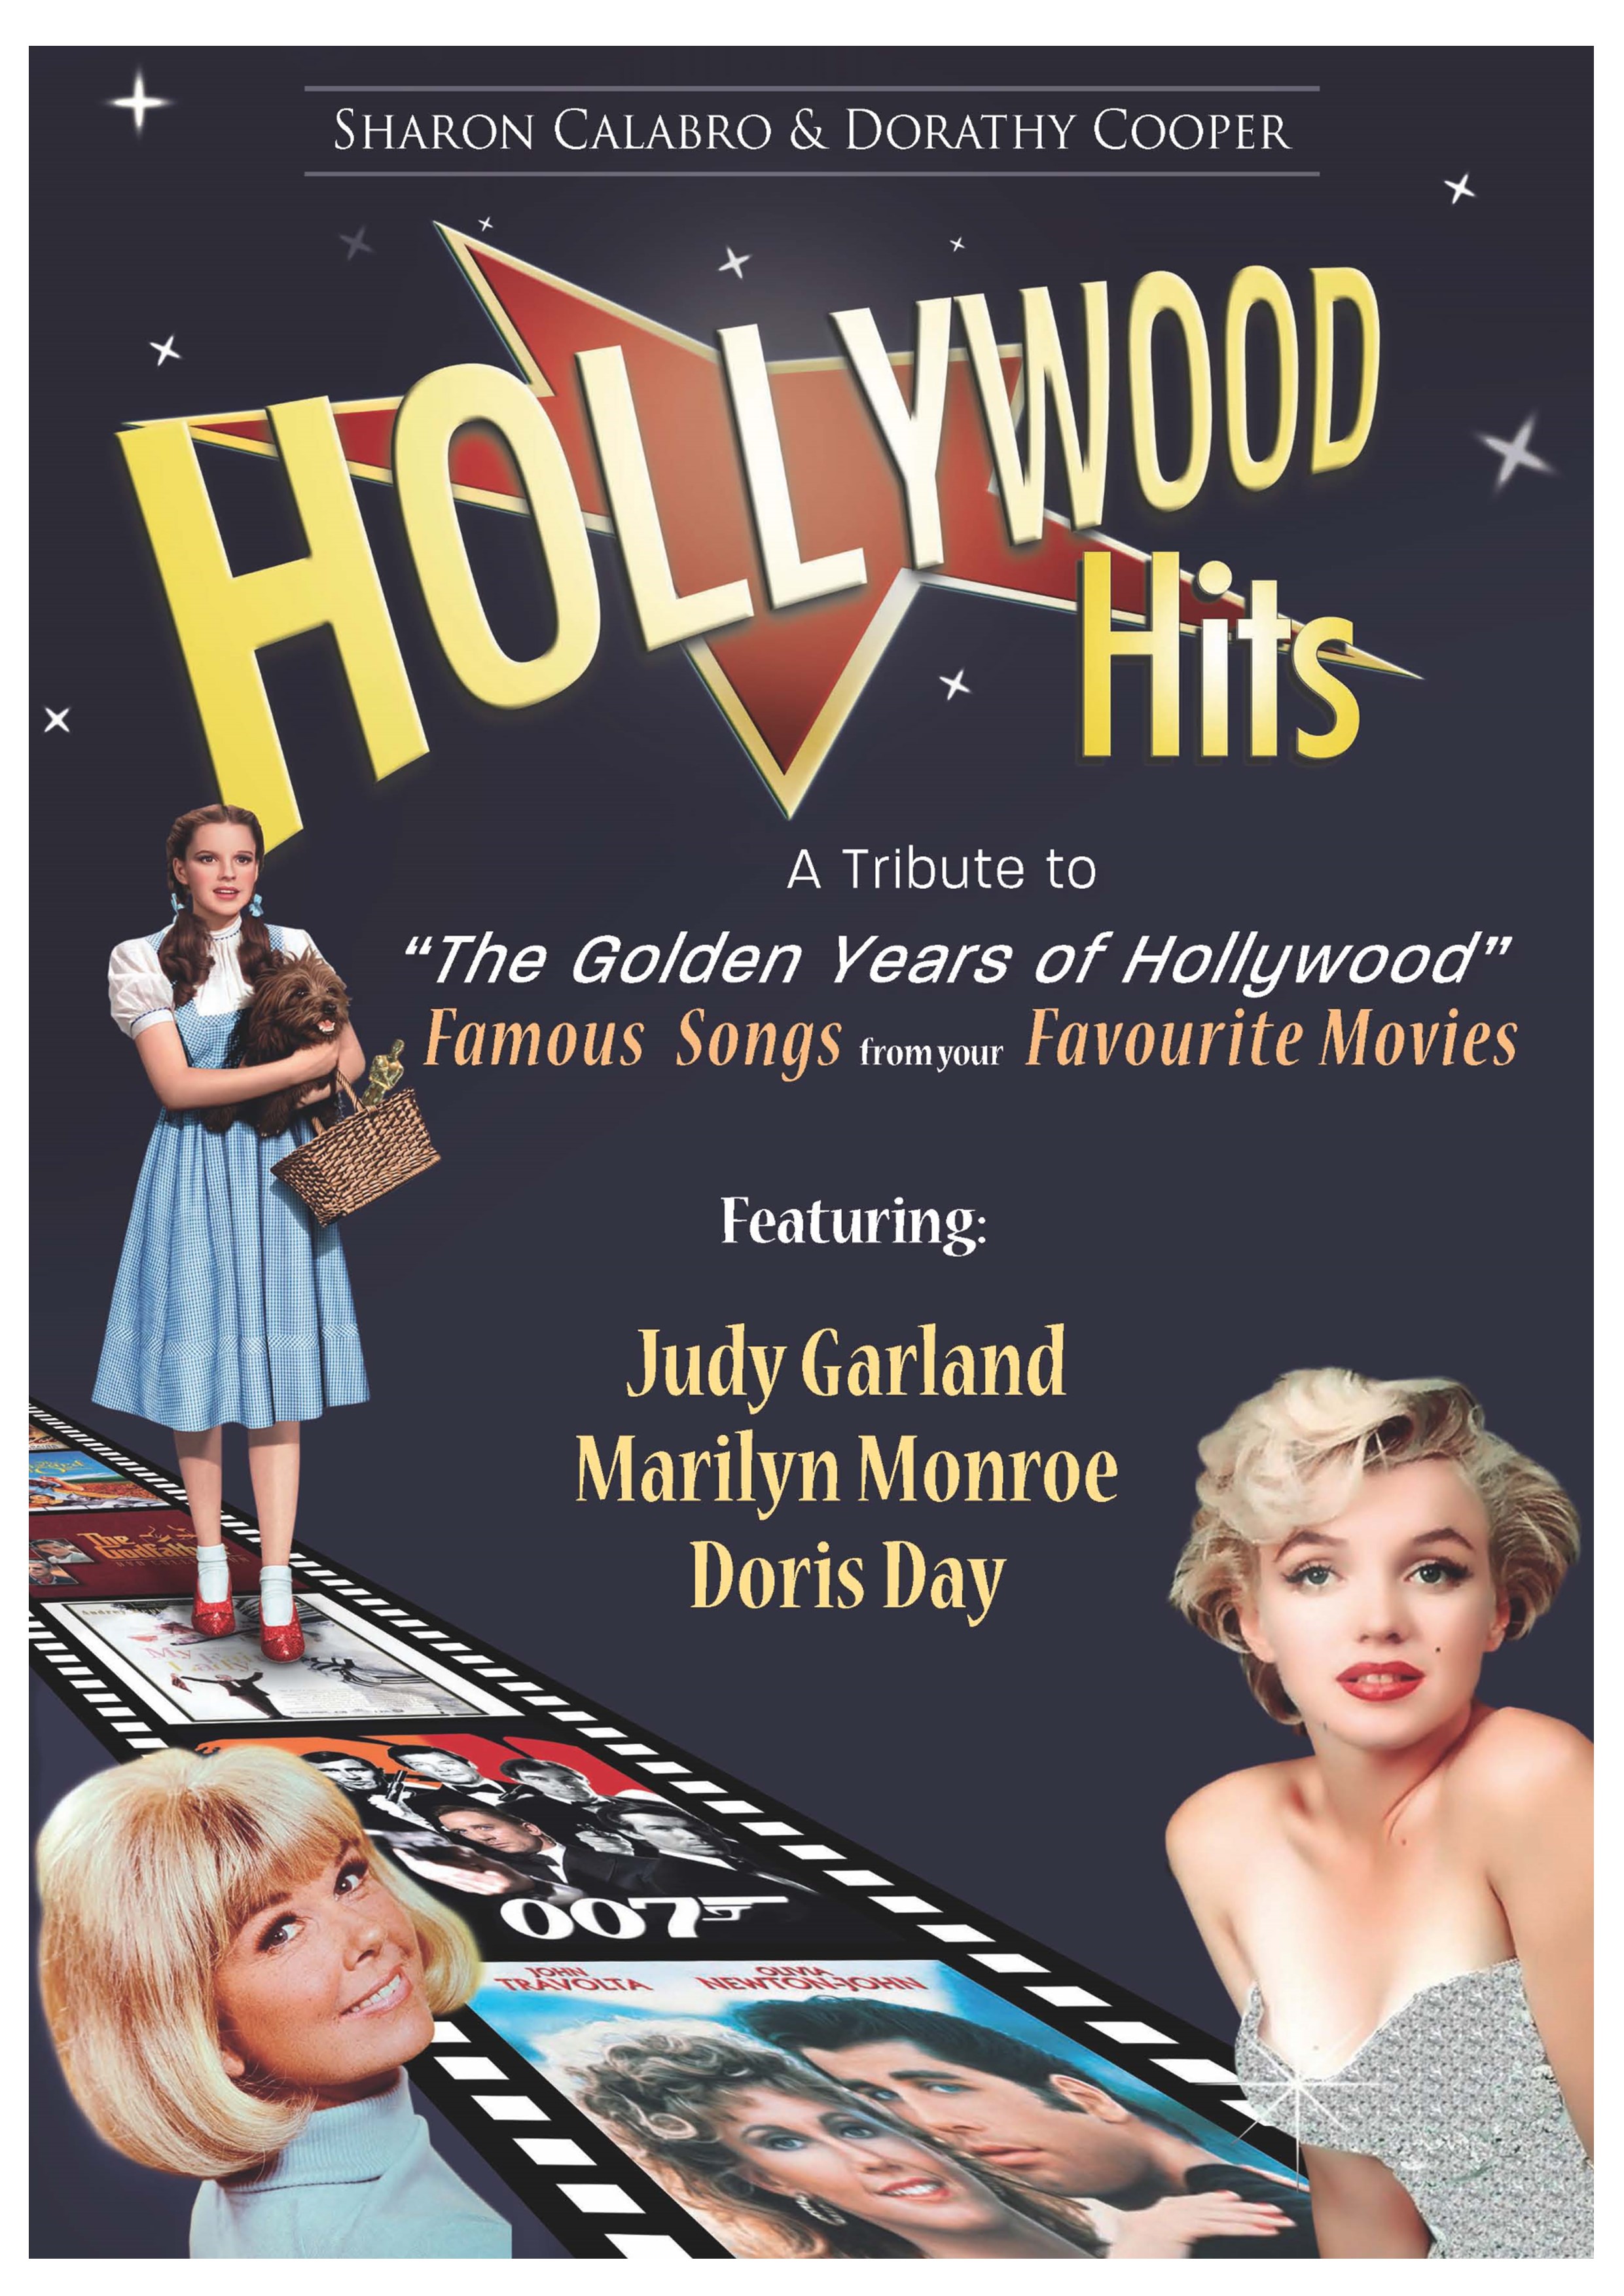 HOLLYWOOD HITS TRIBUTE SHOW